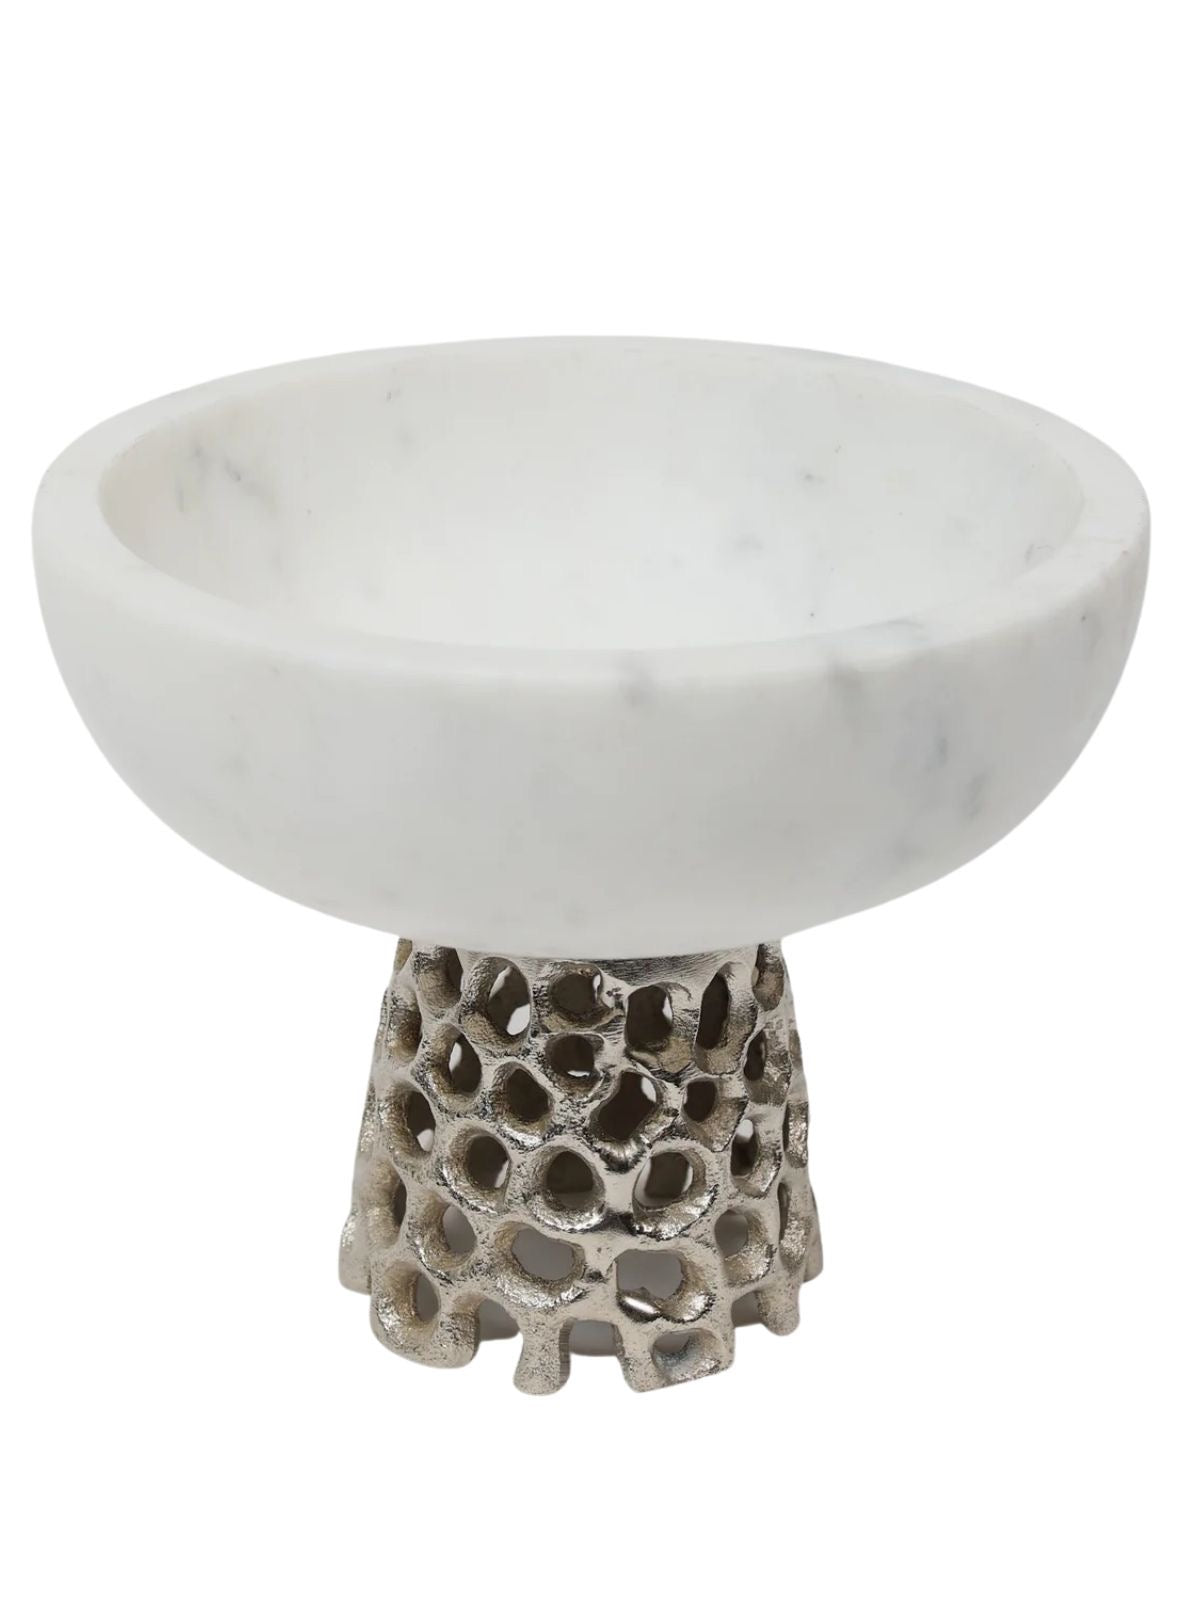 Marble Bowl with Web Cutout Silver Metal Base Sold by KYA Home Decor, 5.75H x 7W.